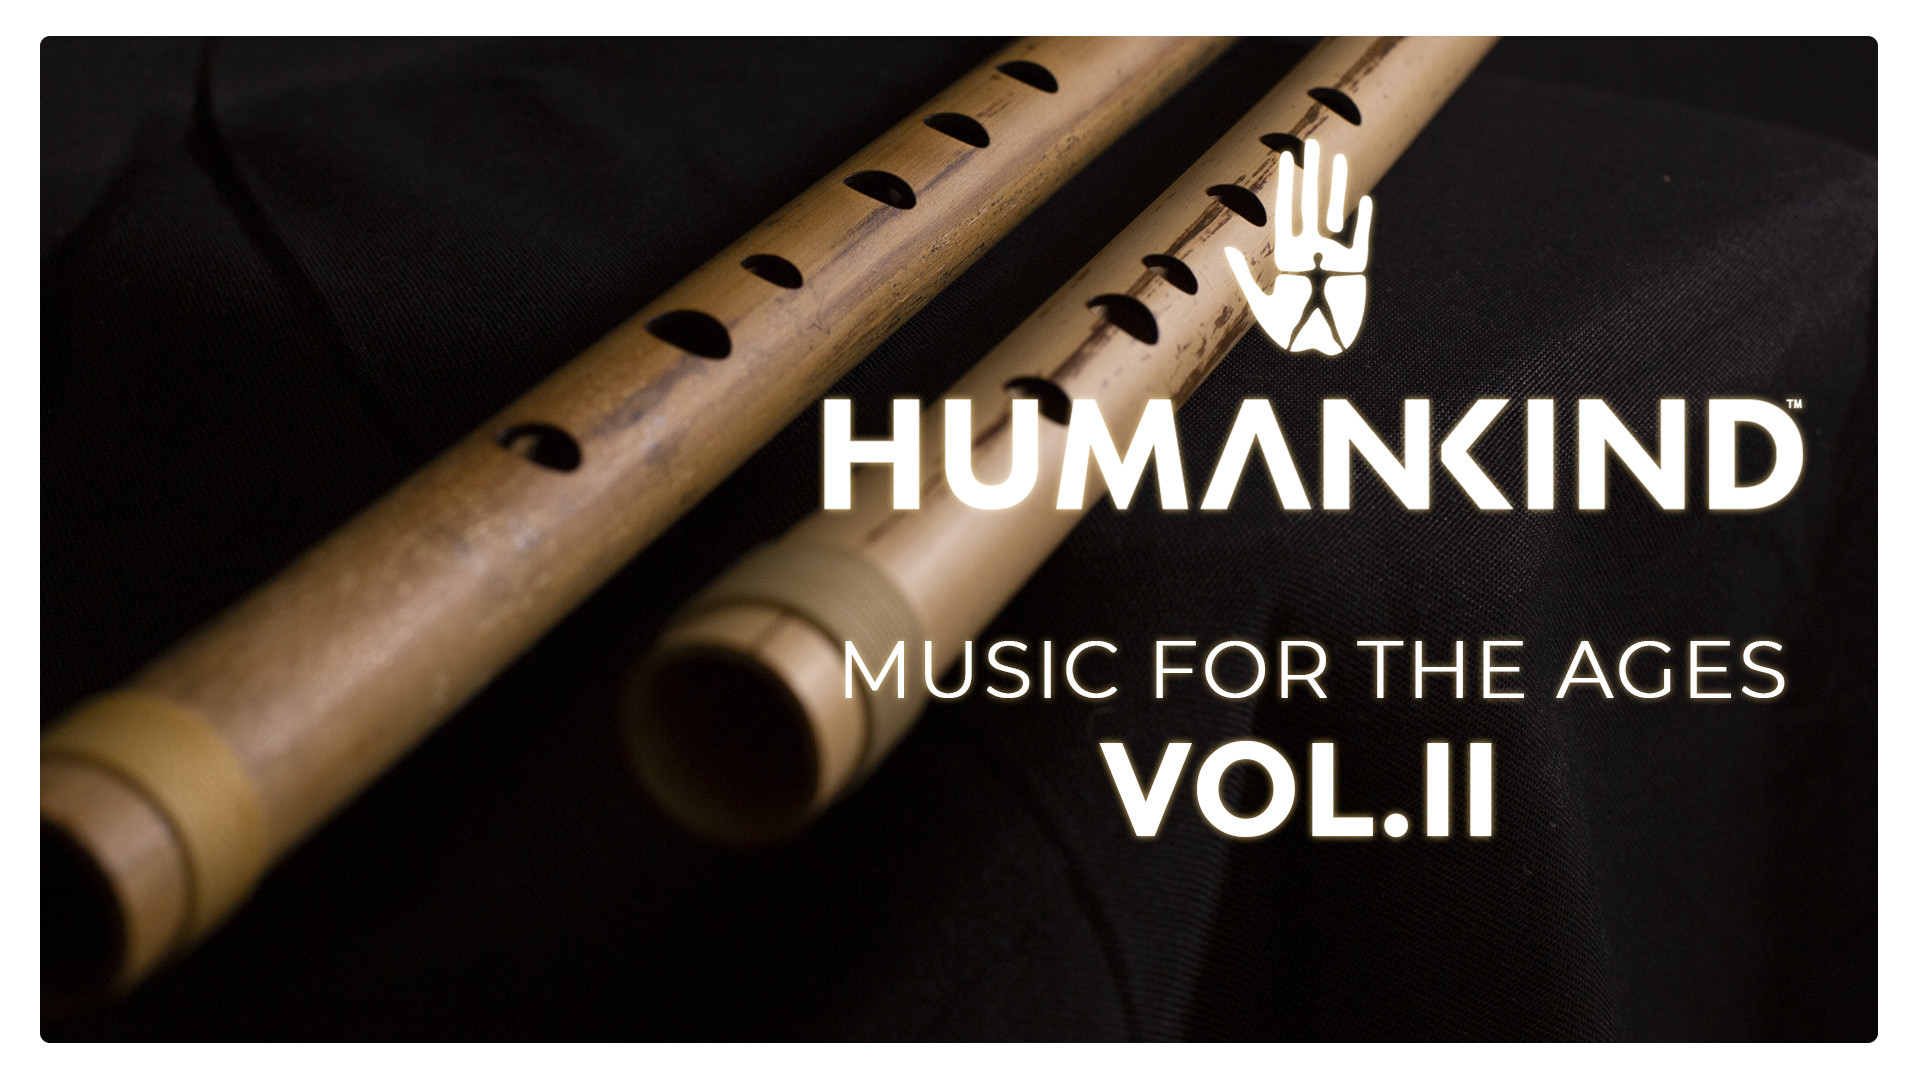 HUMANKIND™ - Music for the Ages, Vol. II Featured Screenshot #1